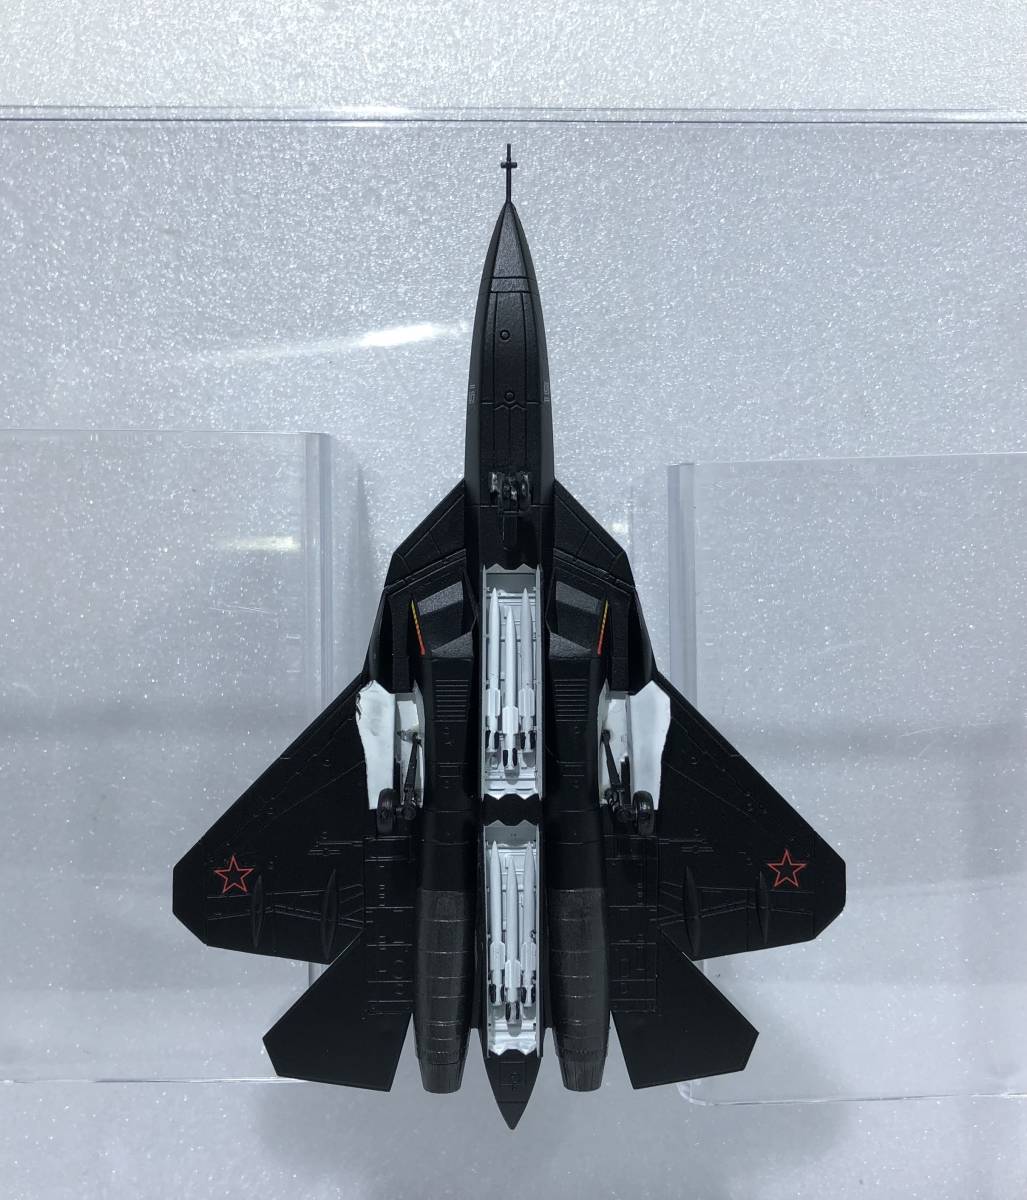 # final product 1/144 PAK FA T-50 / Su-57 spo -i Stealth fighter (aircraft) /. machine *wepon Bay opening condition 